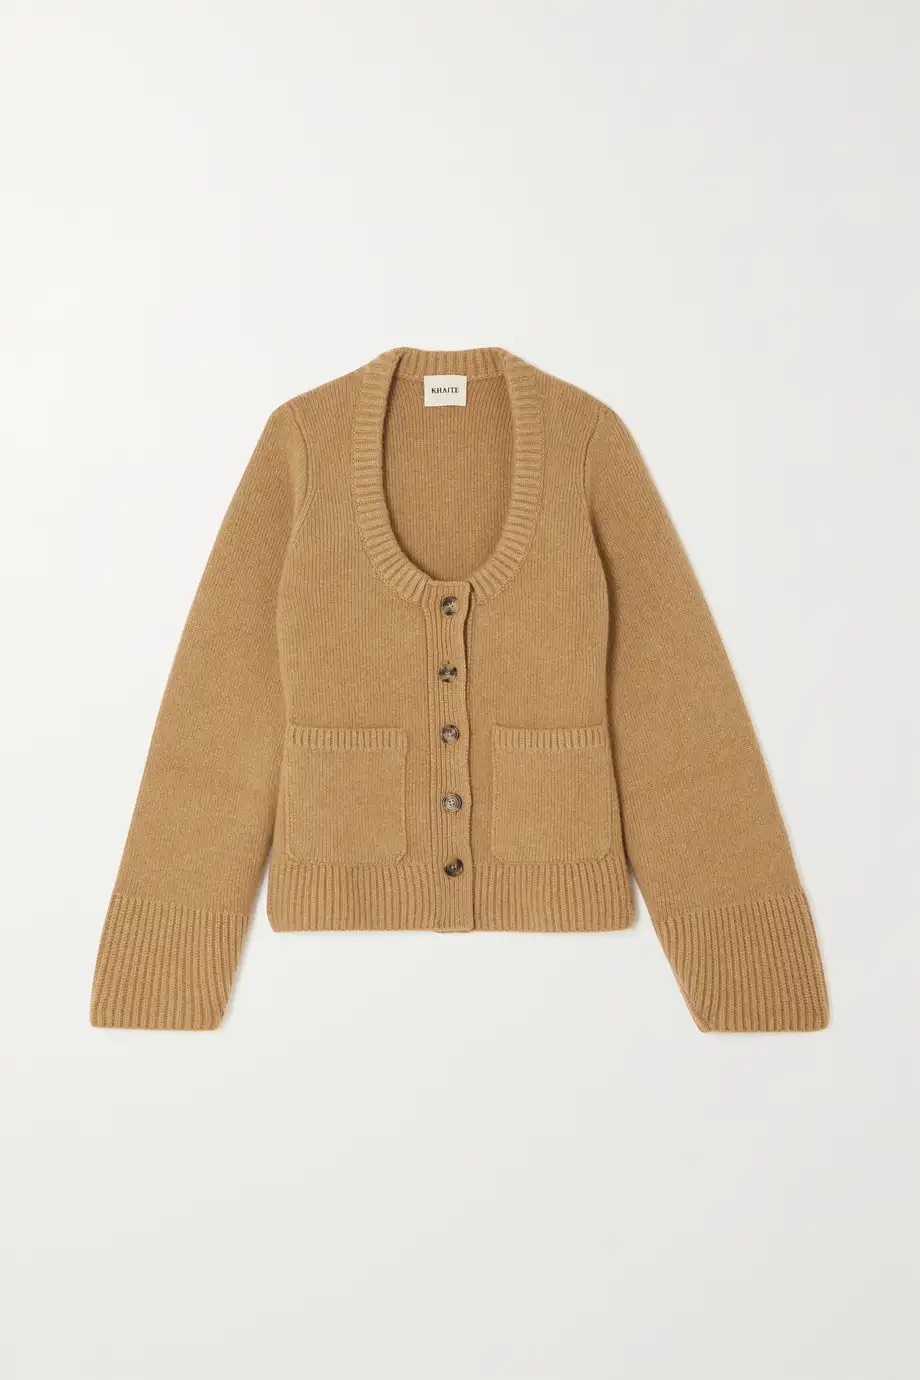 Khaite's Cardigan Is Fashion's Favourite Knit | Who What Wear